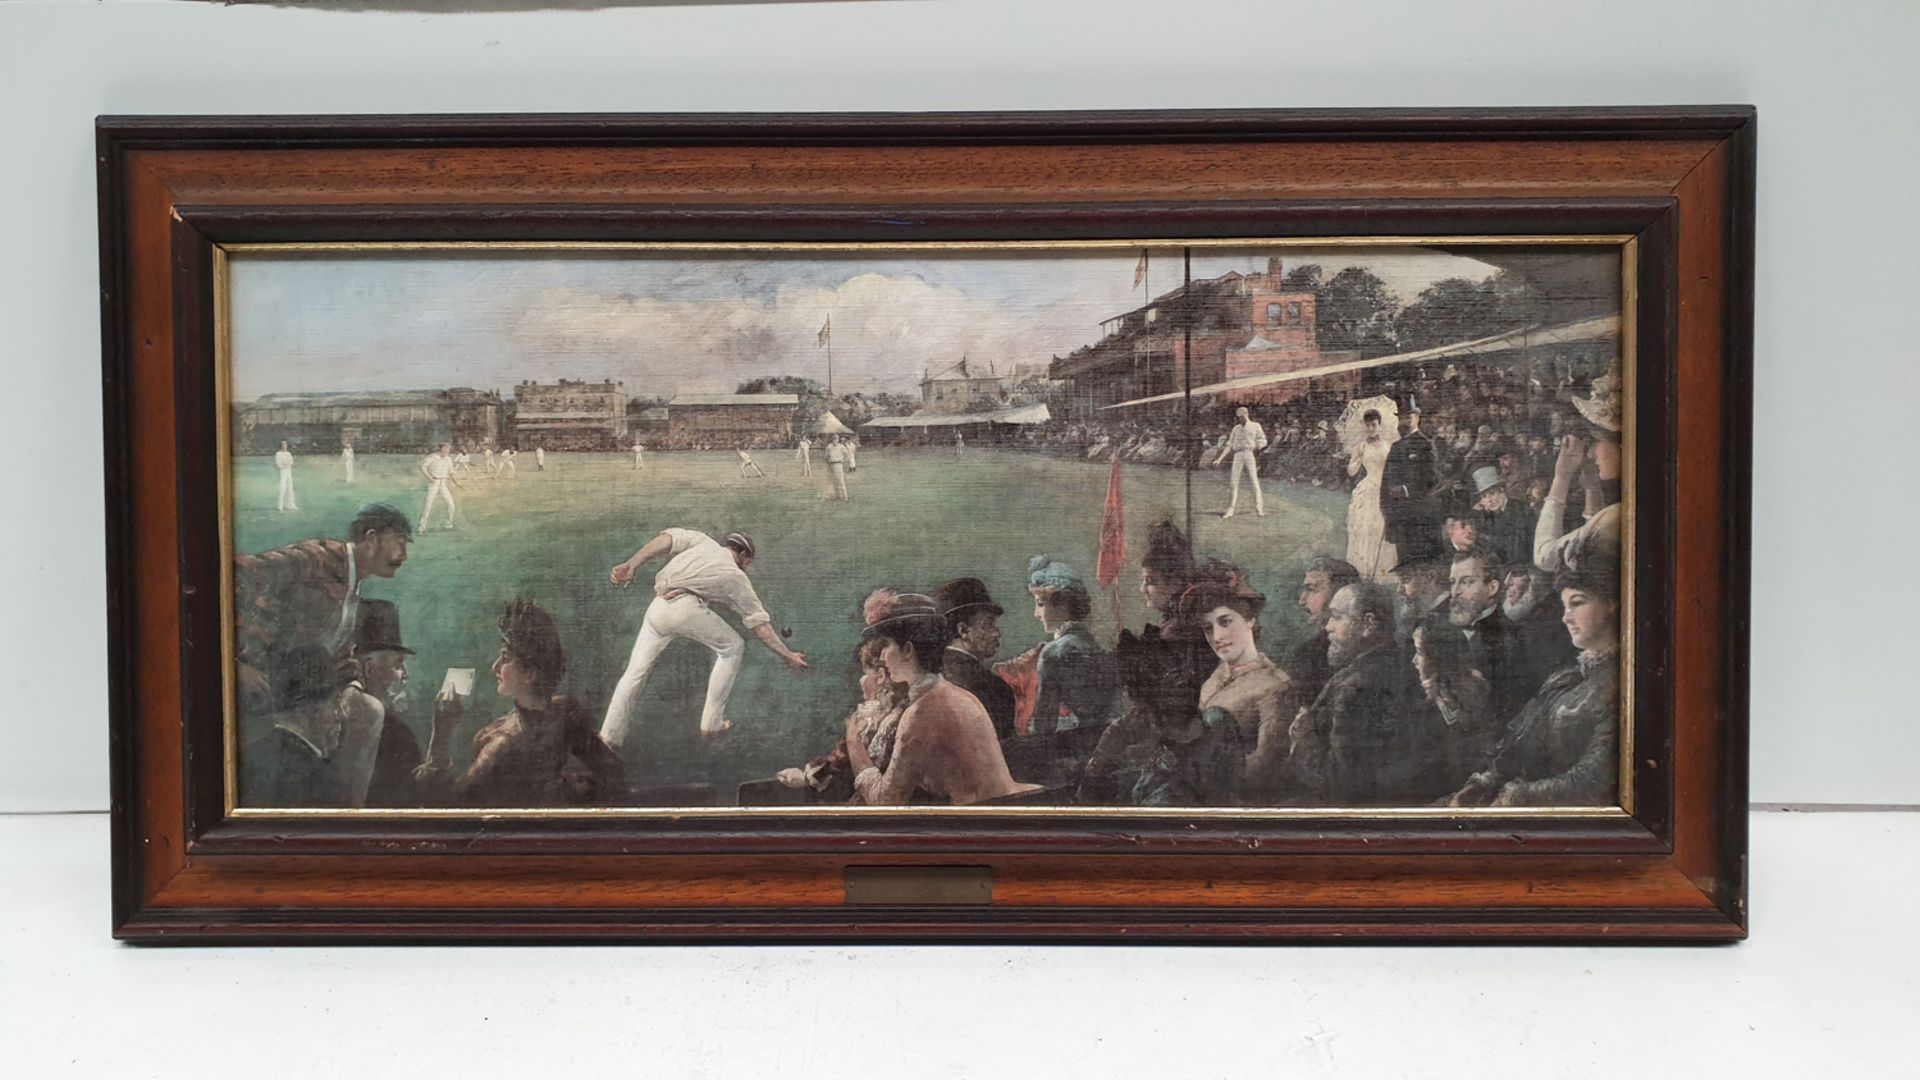 AN IMAGINARY CRICKET MATCH' Framed Picture by Sir Rober Ponsonov-Stales 1853 - 1944.